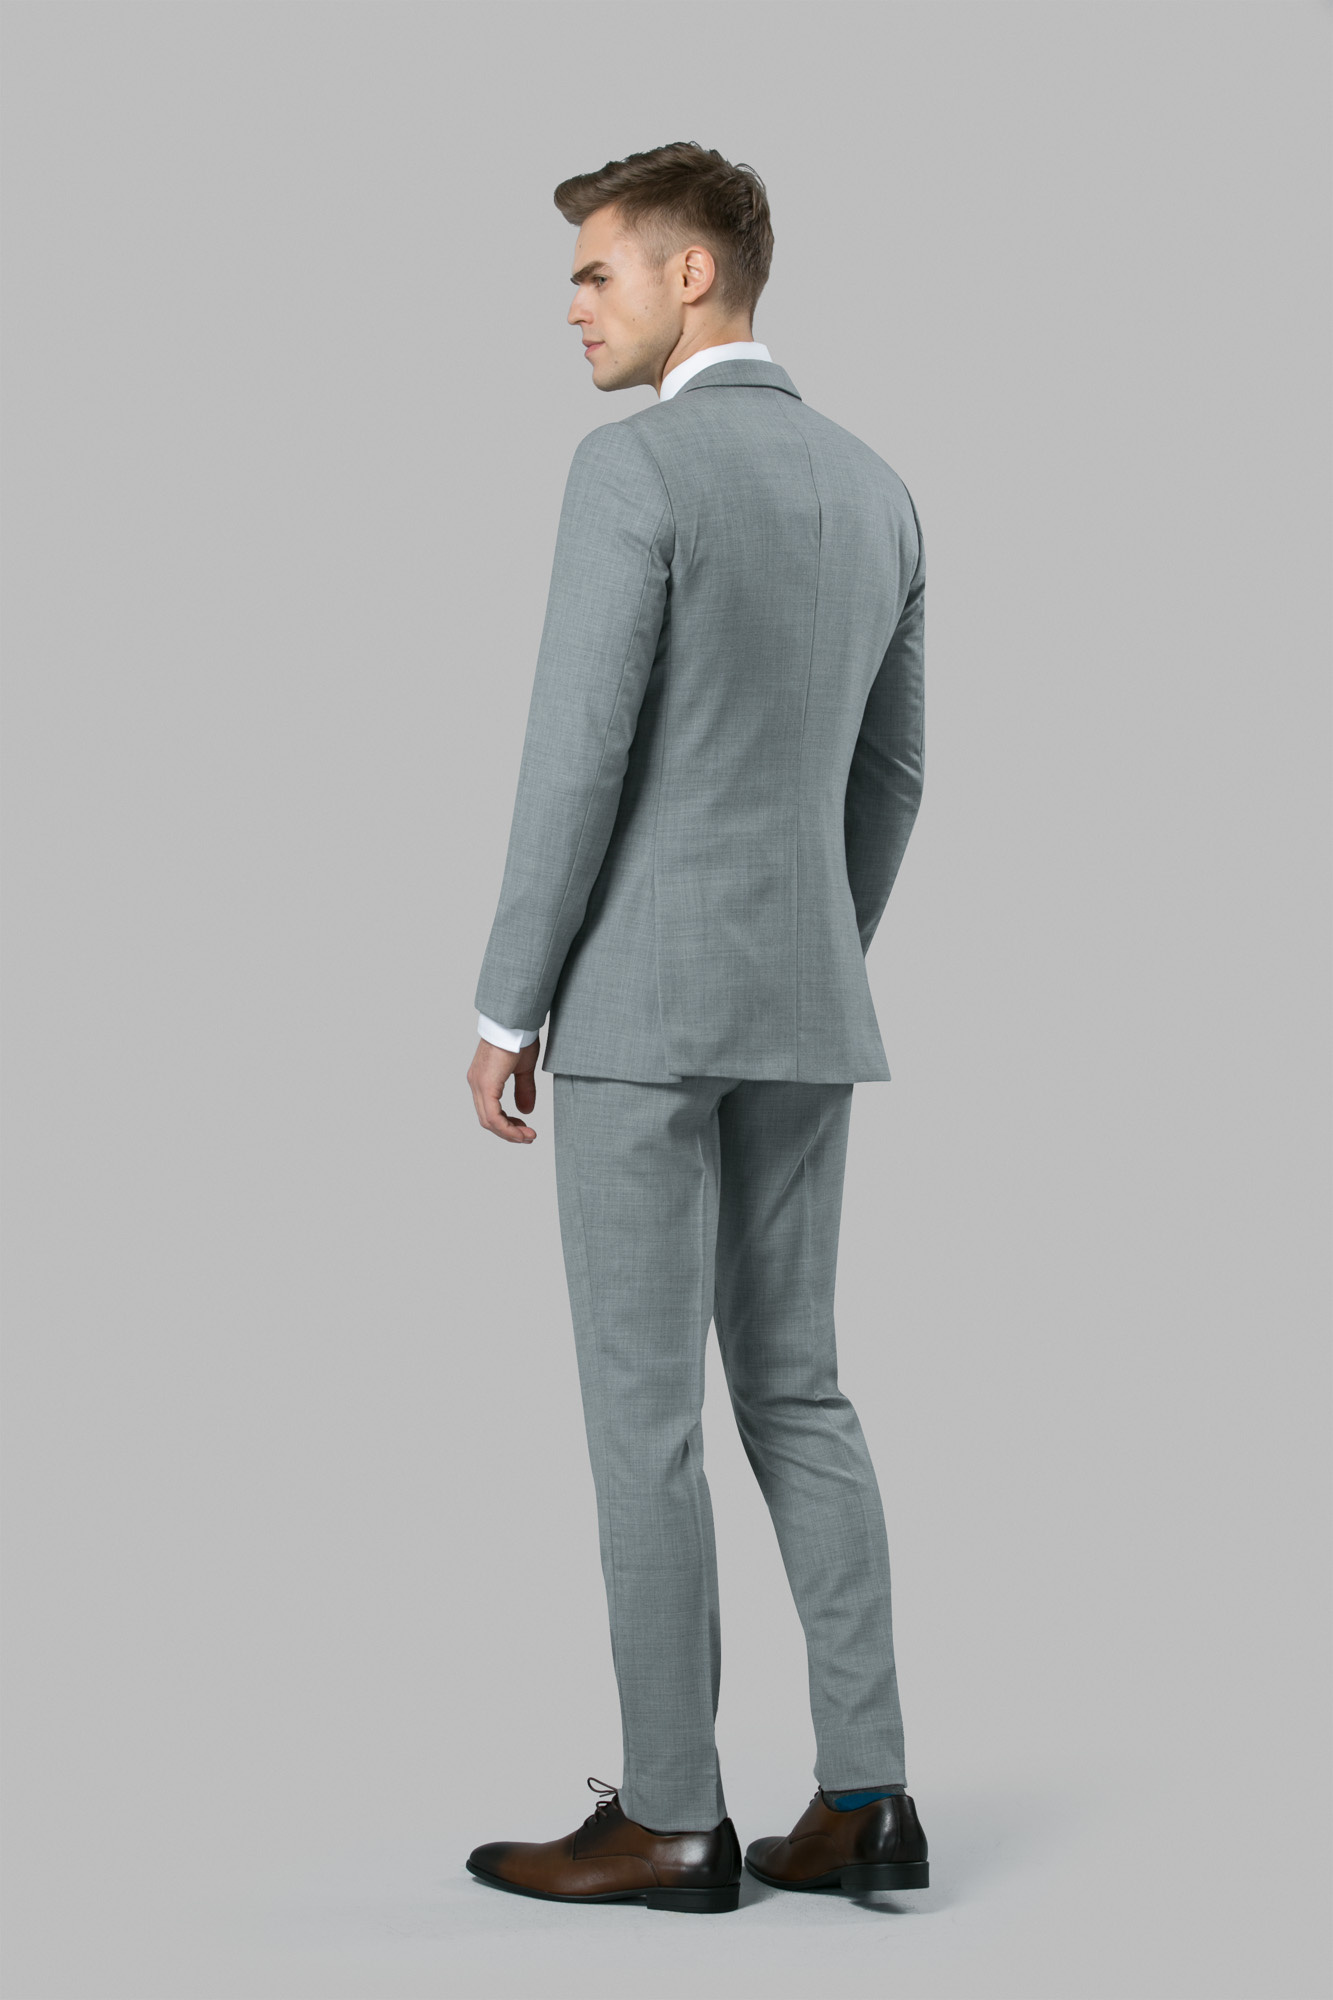 10 Dapper Grey Suits You'll Fall In Love With | Light grey suit men, Grey  suit men, Black suit men